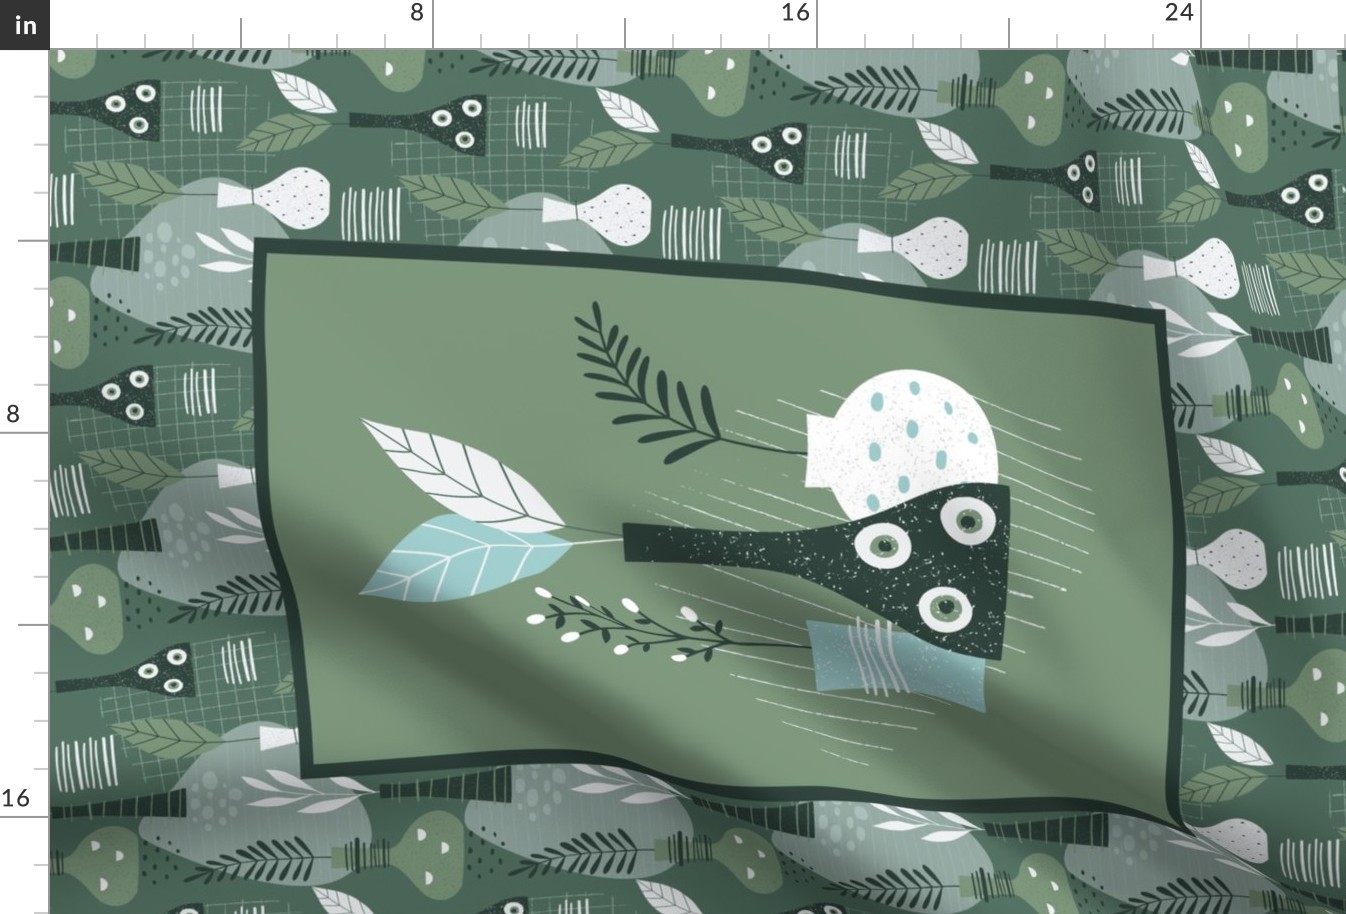 Large 27x18 Fat Quarter Panel Bud Vases Fern Stems in Moss Green White Aqua for Wall Hanging or Kitchen Tea Towel